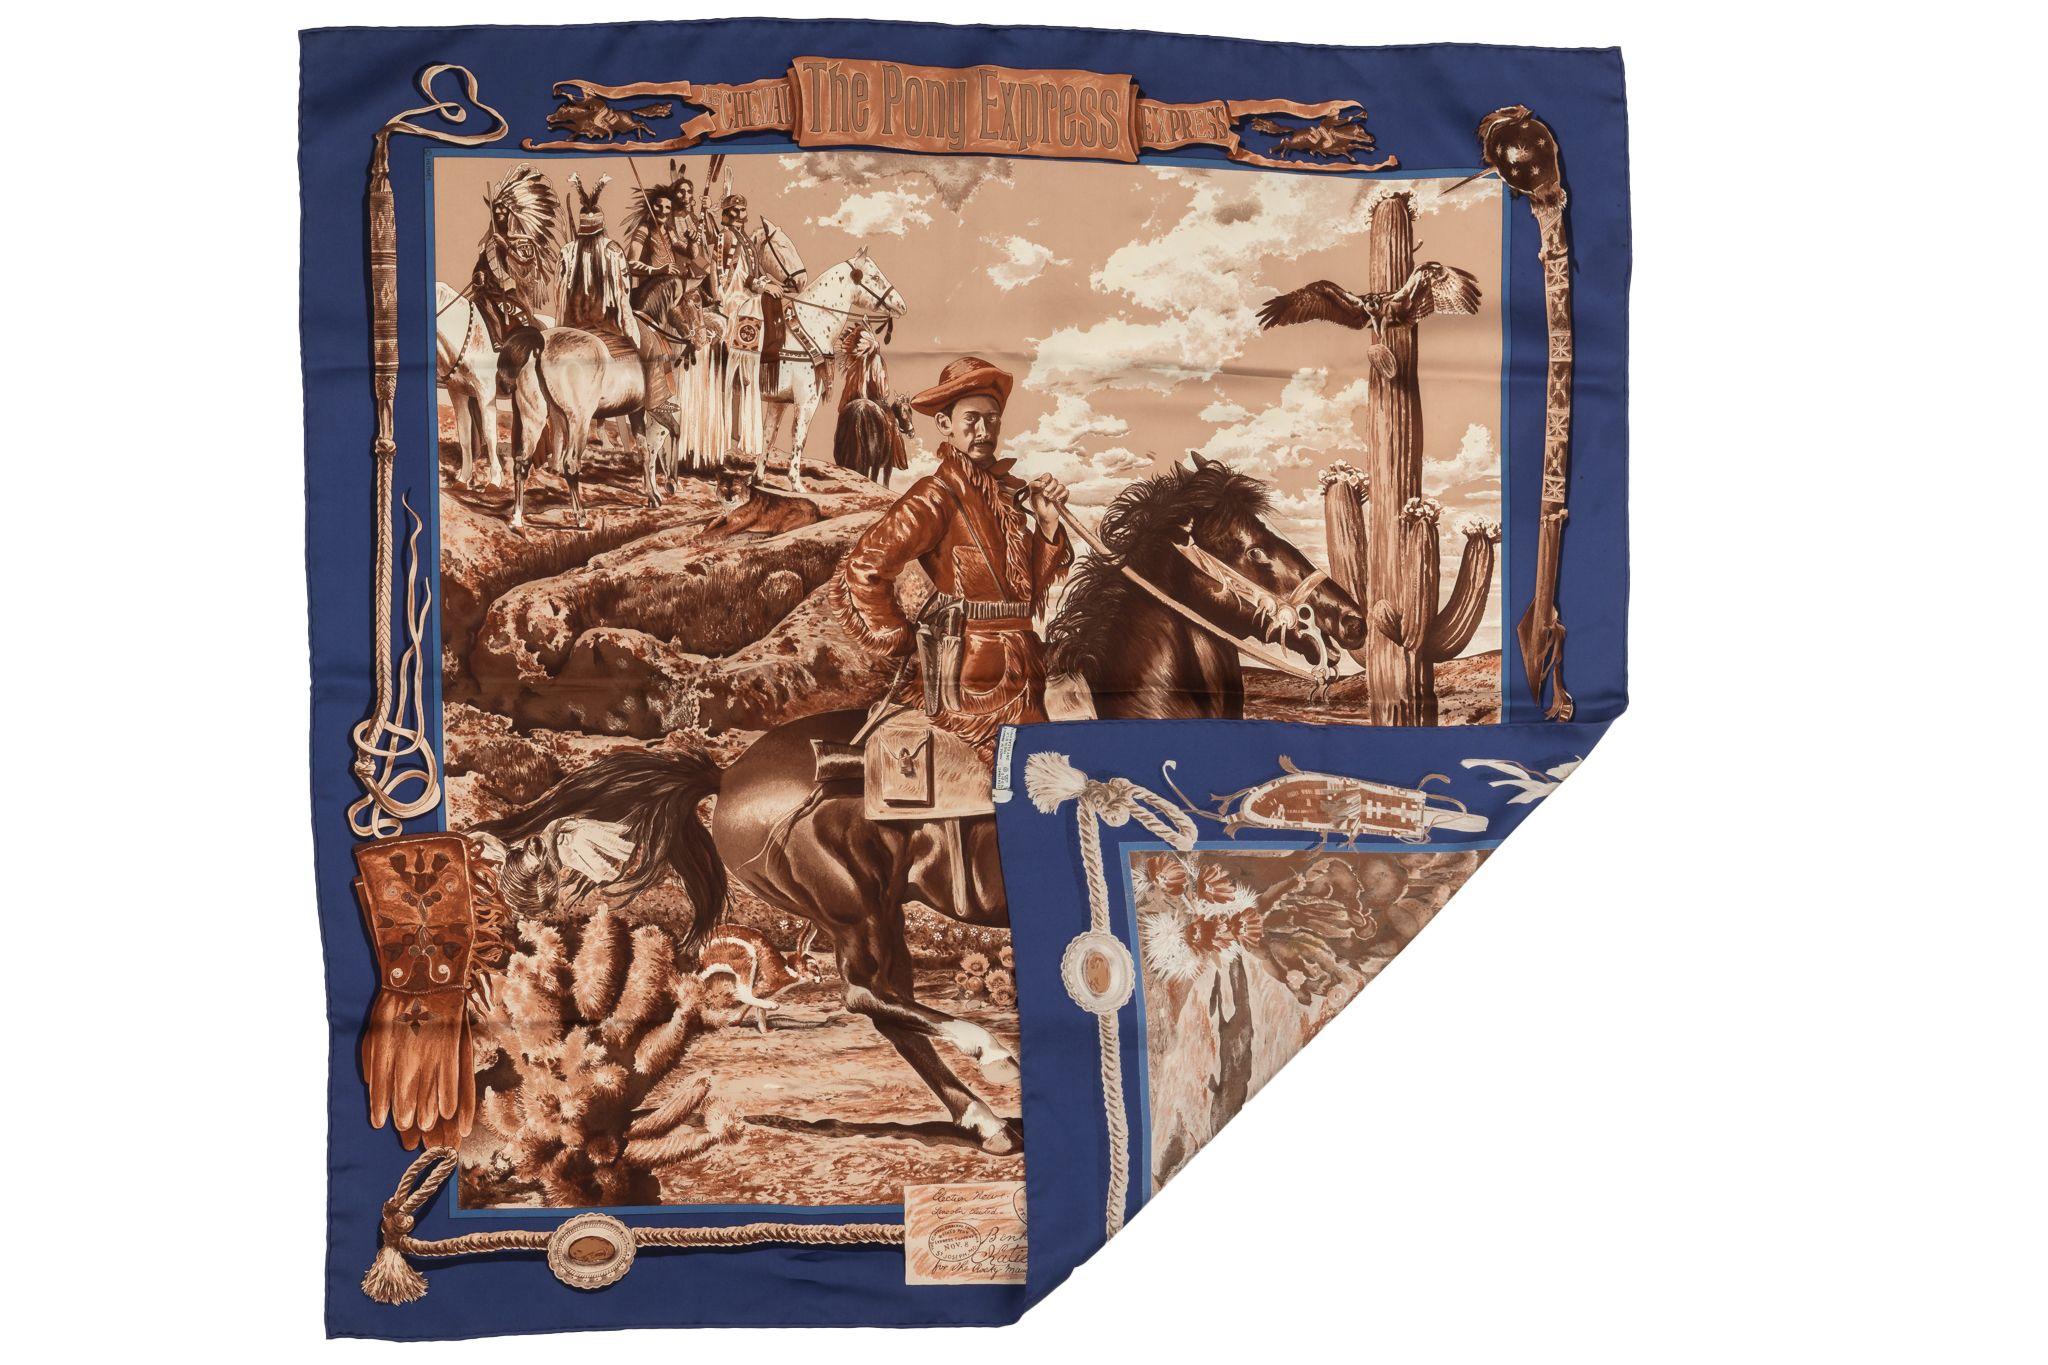 Hermès Pony Express silk scarf by famed artist Kermit Oliver. The Pony Express features the postal system between Missouri and California during the mid 1800s. Hand-rolled edges. Does not include box. Minimal wear.